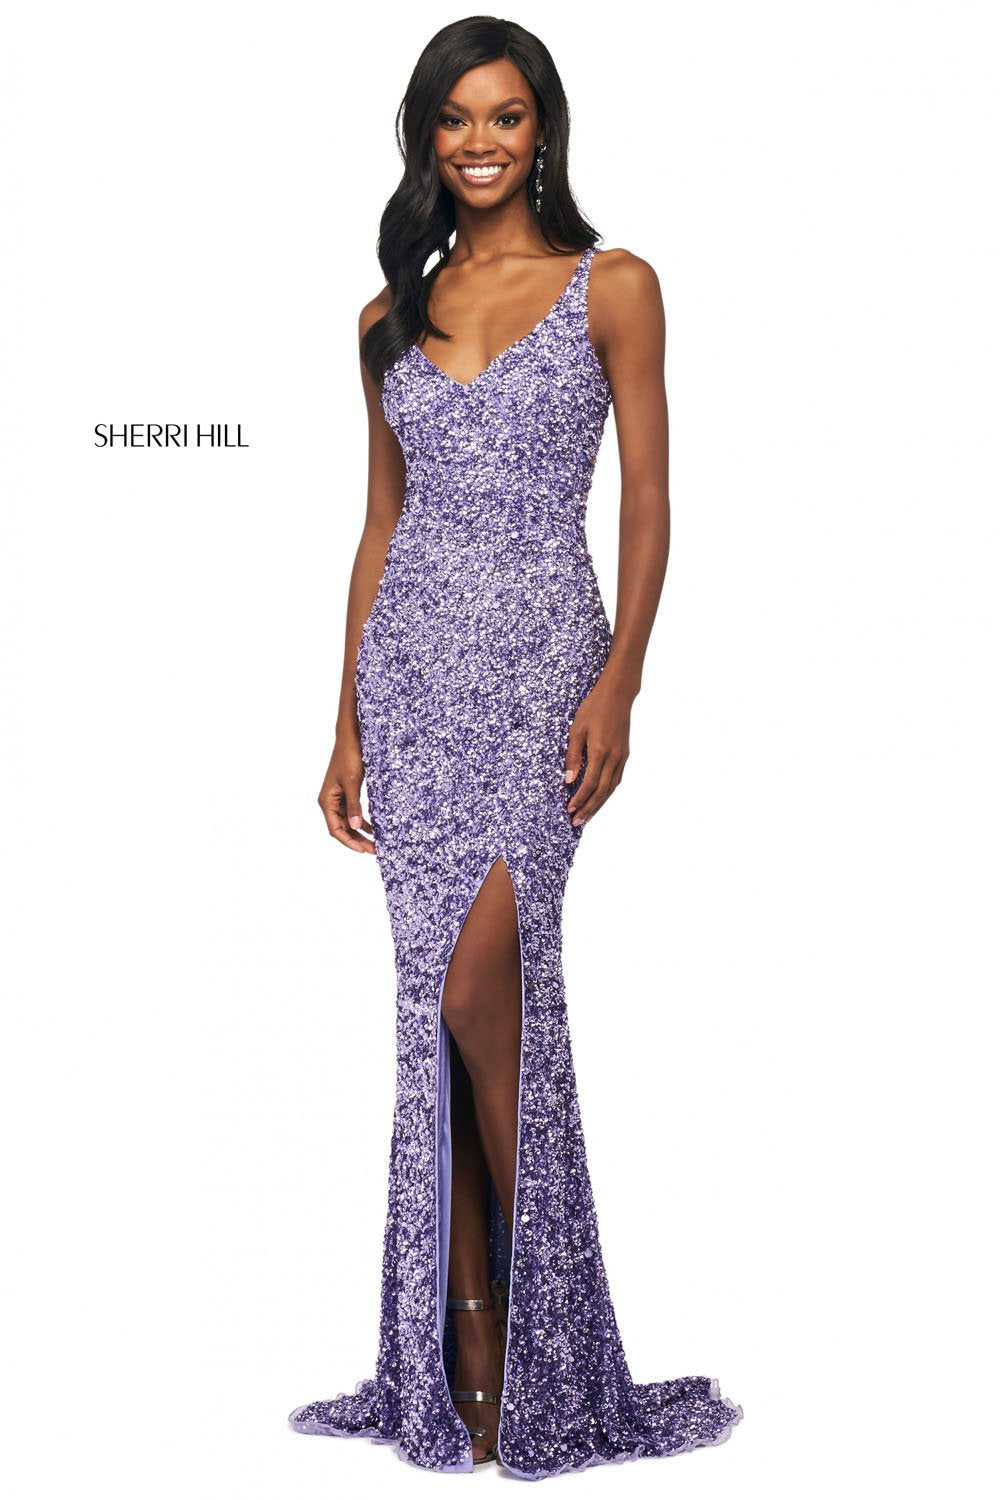 Sherri Hill 53450 dress images in these colors: Light Blue, Aqua, Gold, Light Pink, Silver, Rose Gold, Light Yellow, Lilac, Burgundy, Navy, Black, Red, Emerald, Royal.